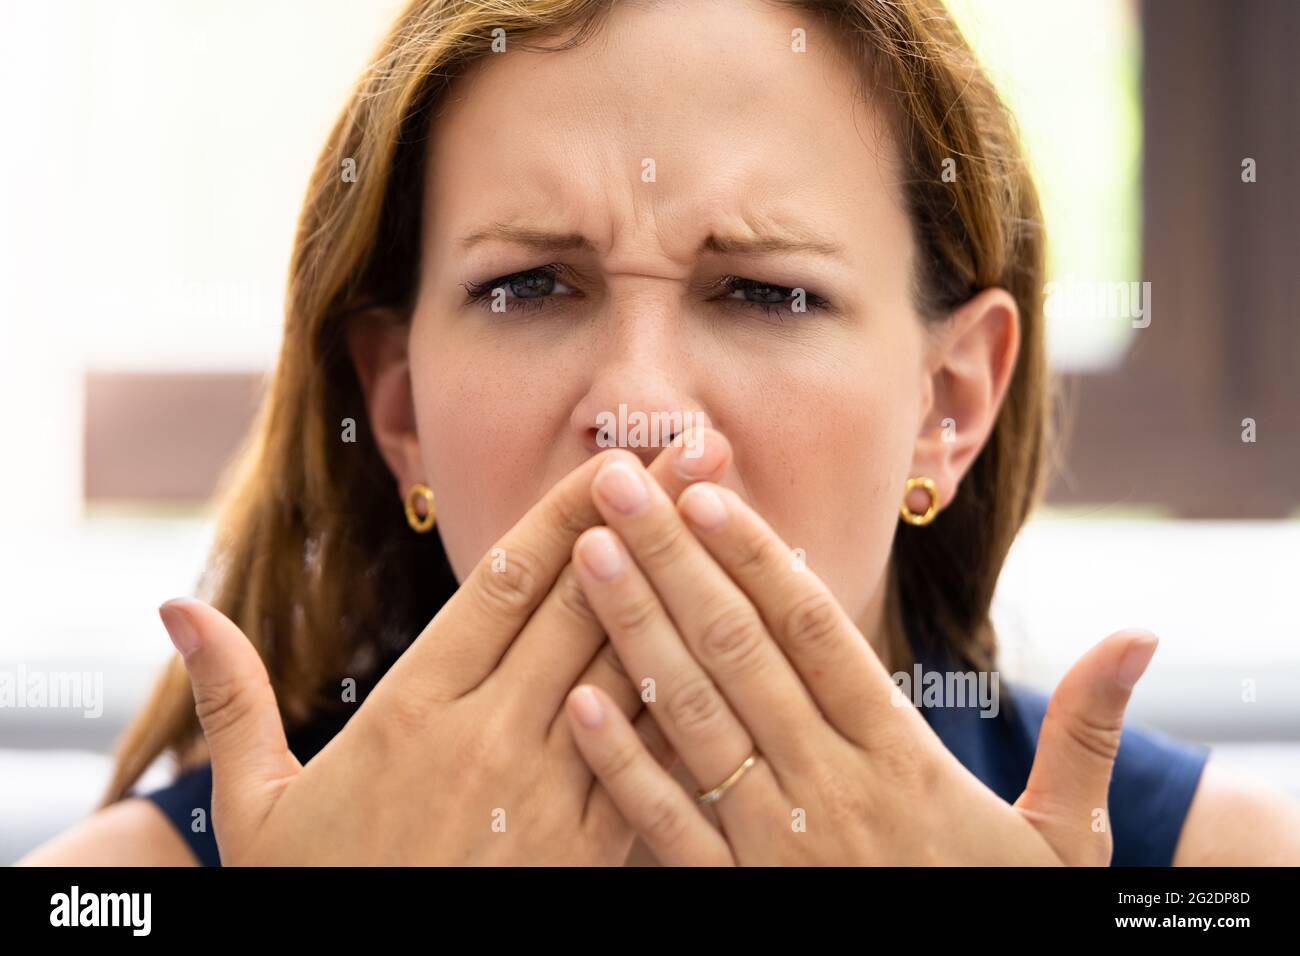 Bad Breath Smell Problem. Young Person Problem Stock Photo